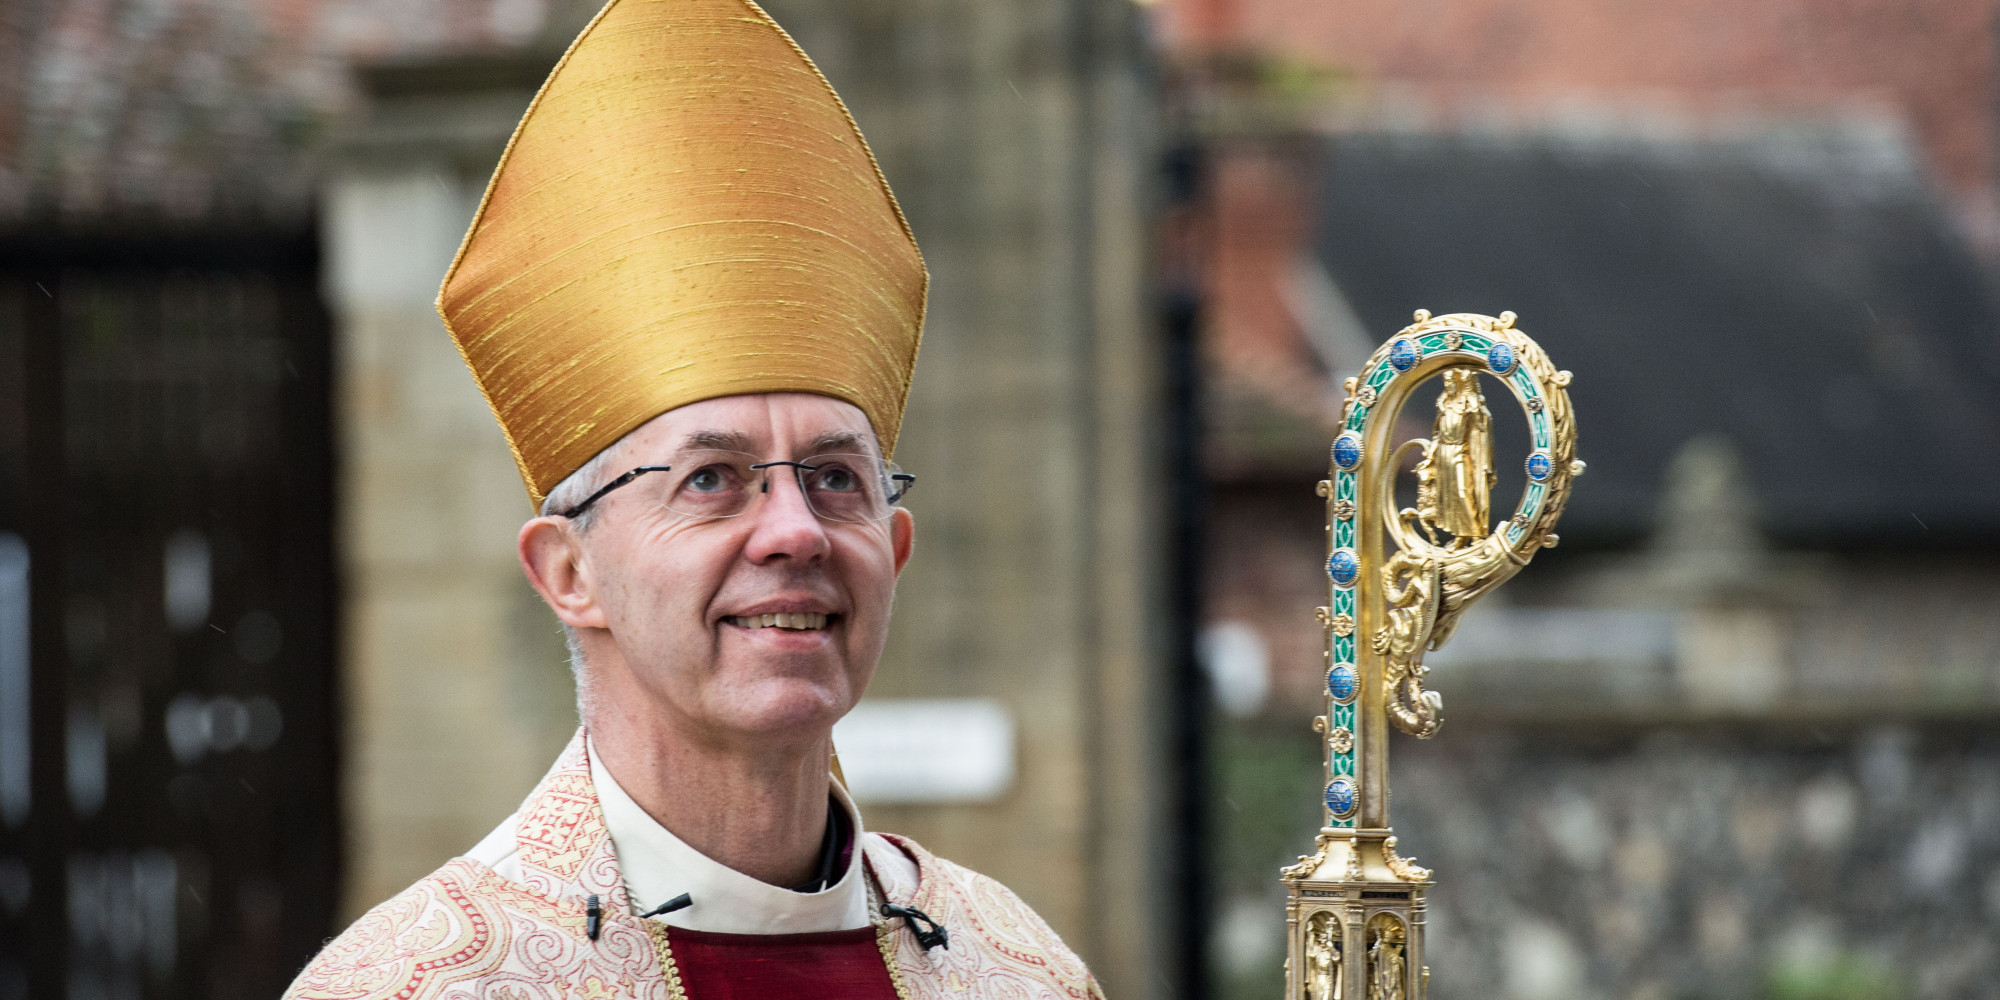 Archbishop Of Canterbury Justin Welby #39 s New Year #39 s Day Message: #39 Jesus